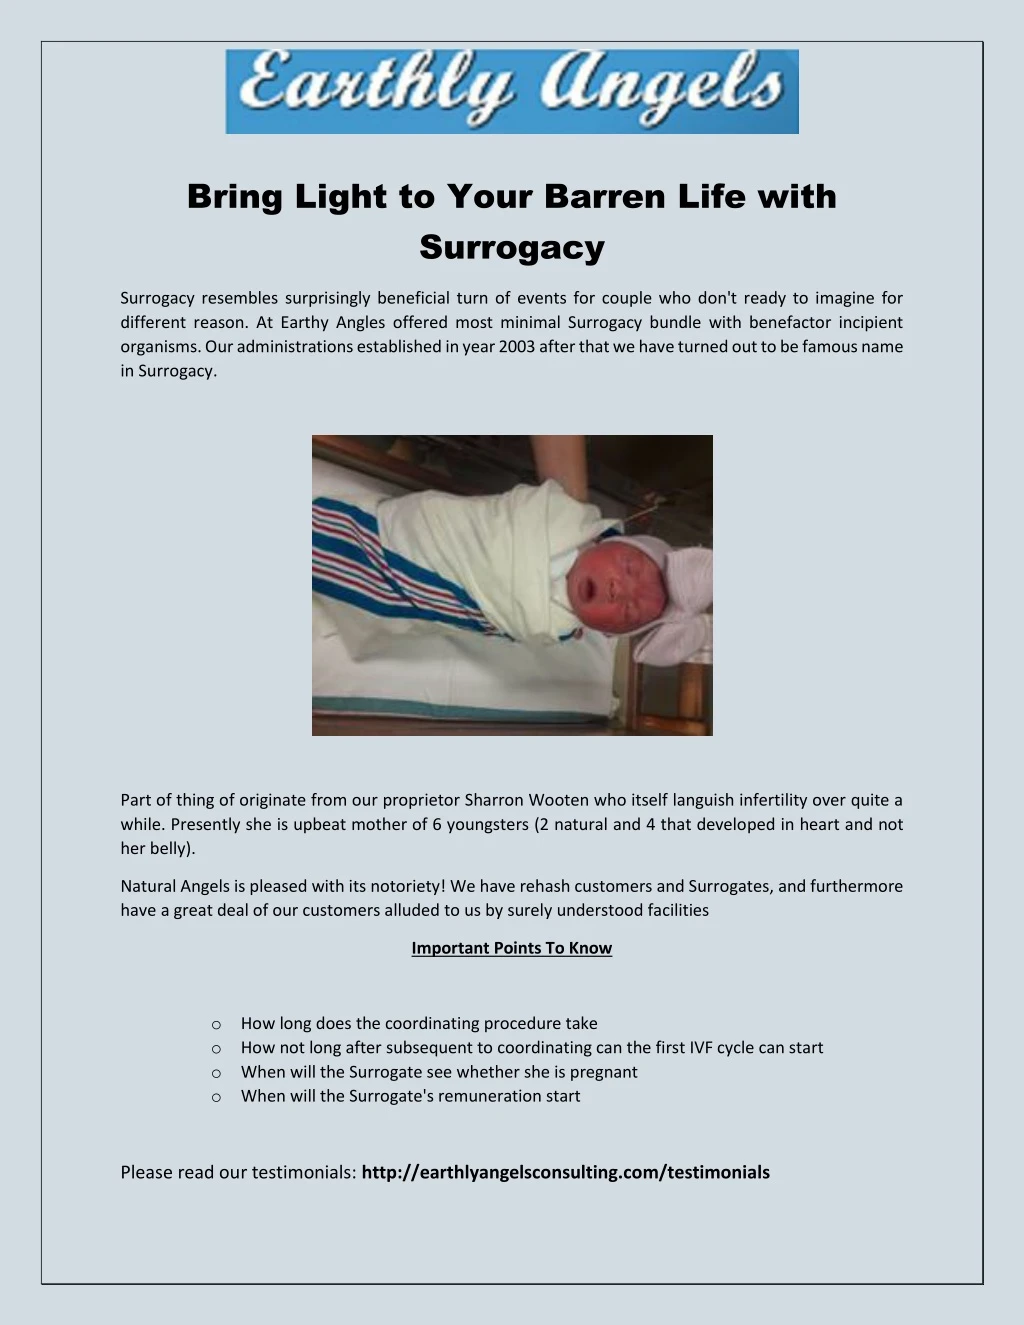 bring light to your barren life with surrogacy